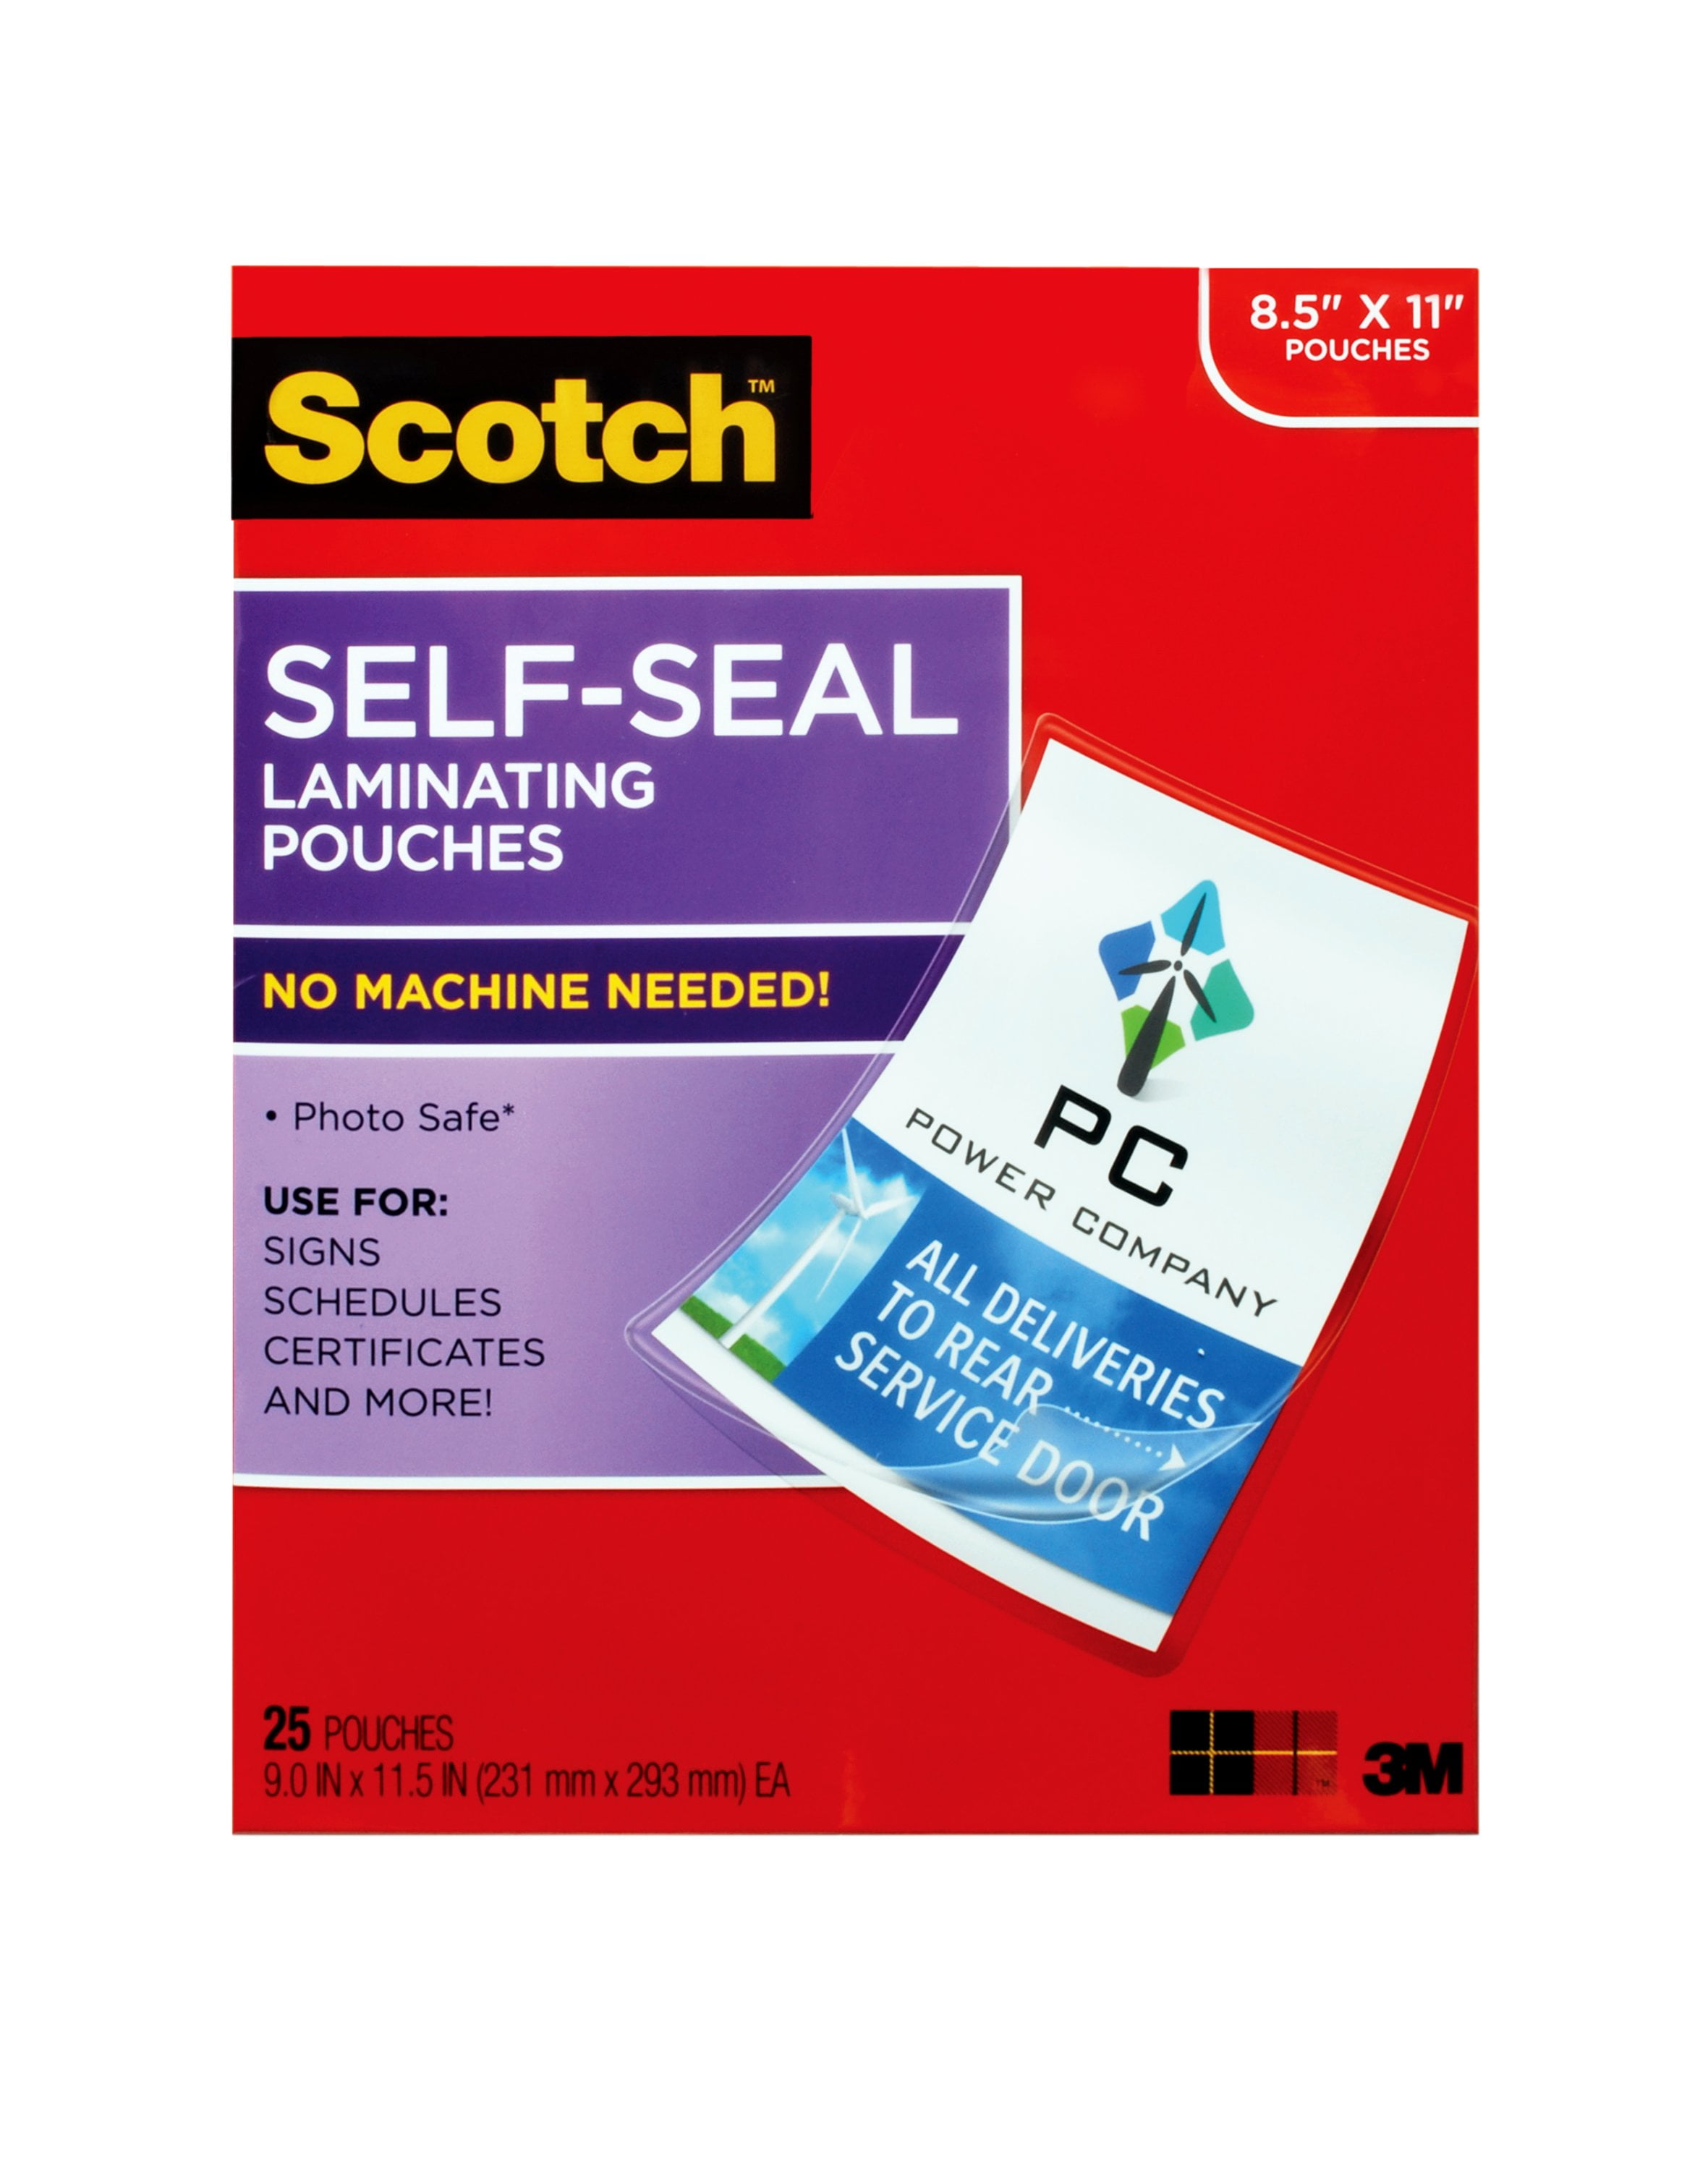 Textured Self Adhesive Laminating Sheets, Smooth Satin Finish, 9 x 11.5  Inches, 4 Mil Thick, 10 Pack, for Letter Size Self Sealing Lamination Sheets  8.5 x 11, Laminating Pouches 